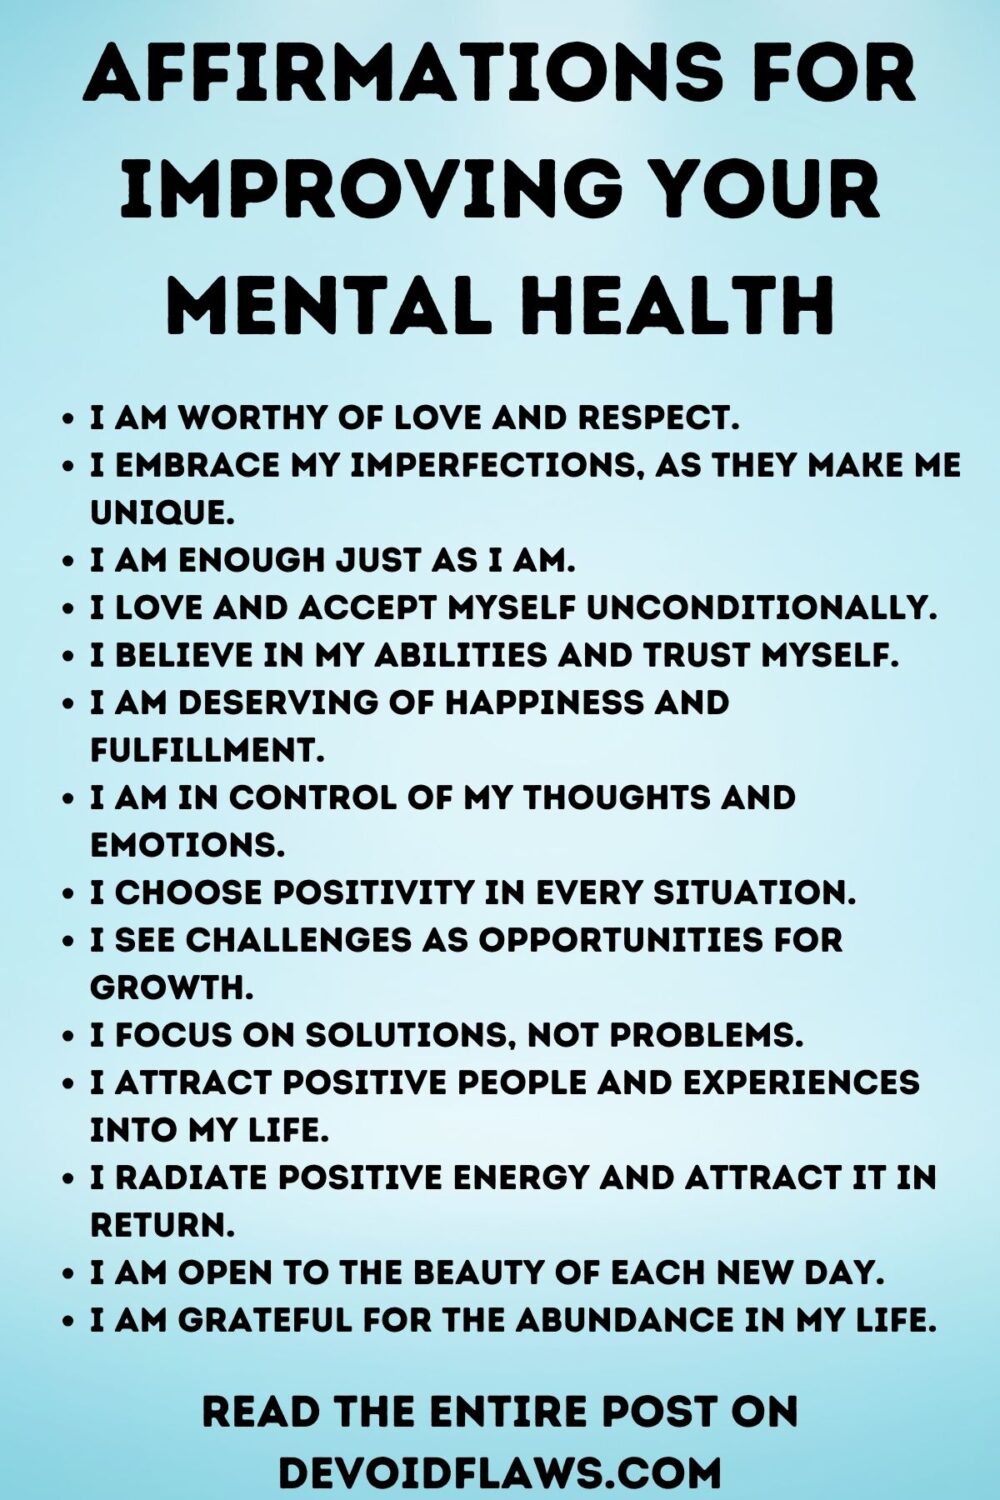 Affirmations To Improve Your Mental Health